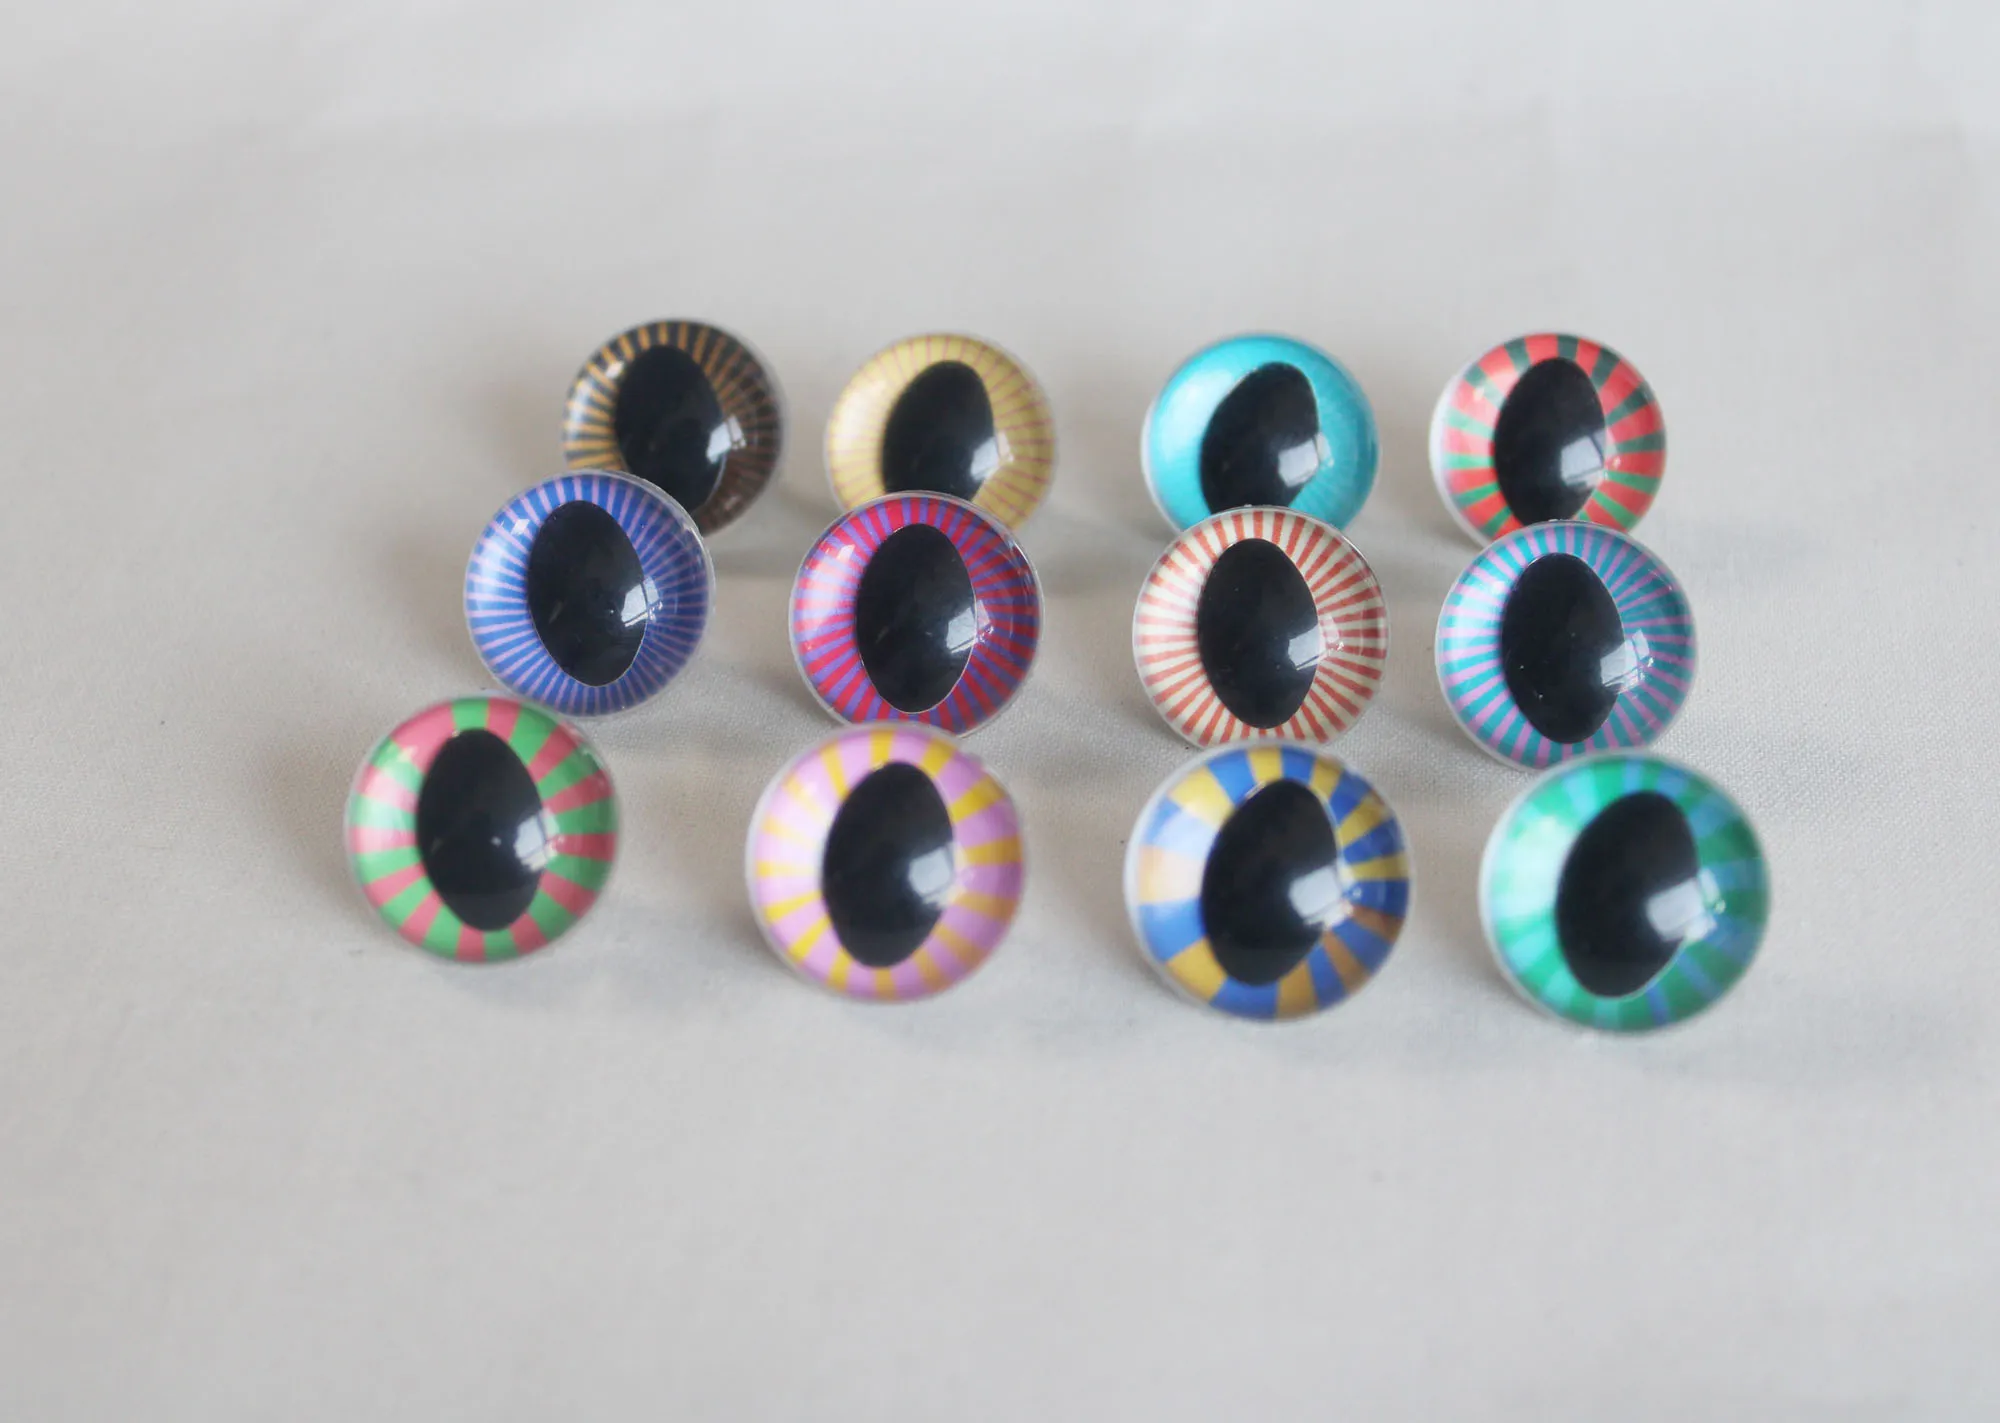 NEW LOVELY  EYES 20pcs 12mm 13 14 15 18 25mm  clear crystal safety toy cat eyes  +hand washer--color -size  option--X12B 19